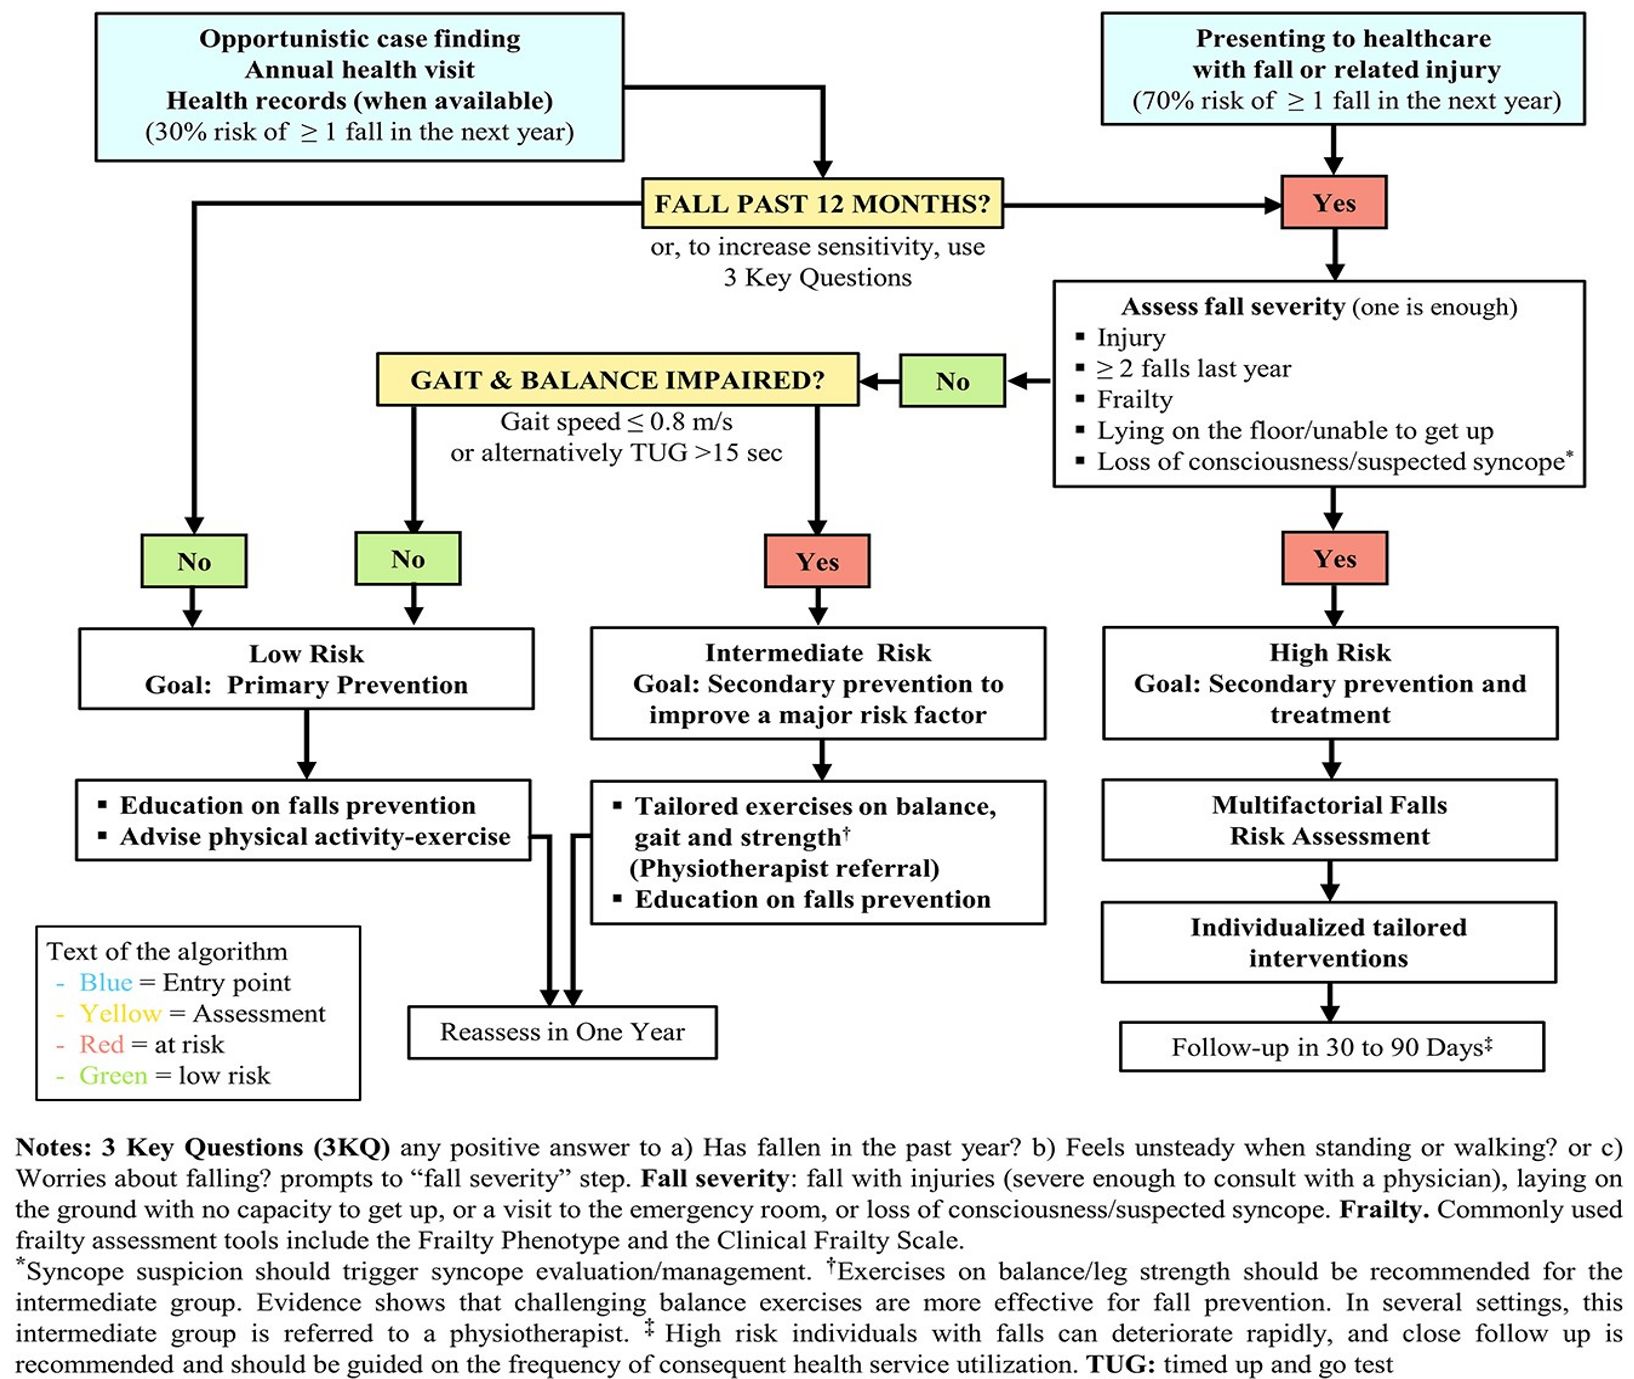 Figure 1. World falls guidelines algorithm for the identification and assessment of falls risk.